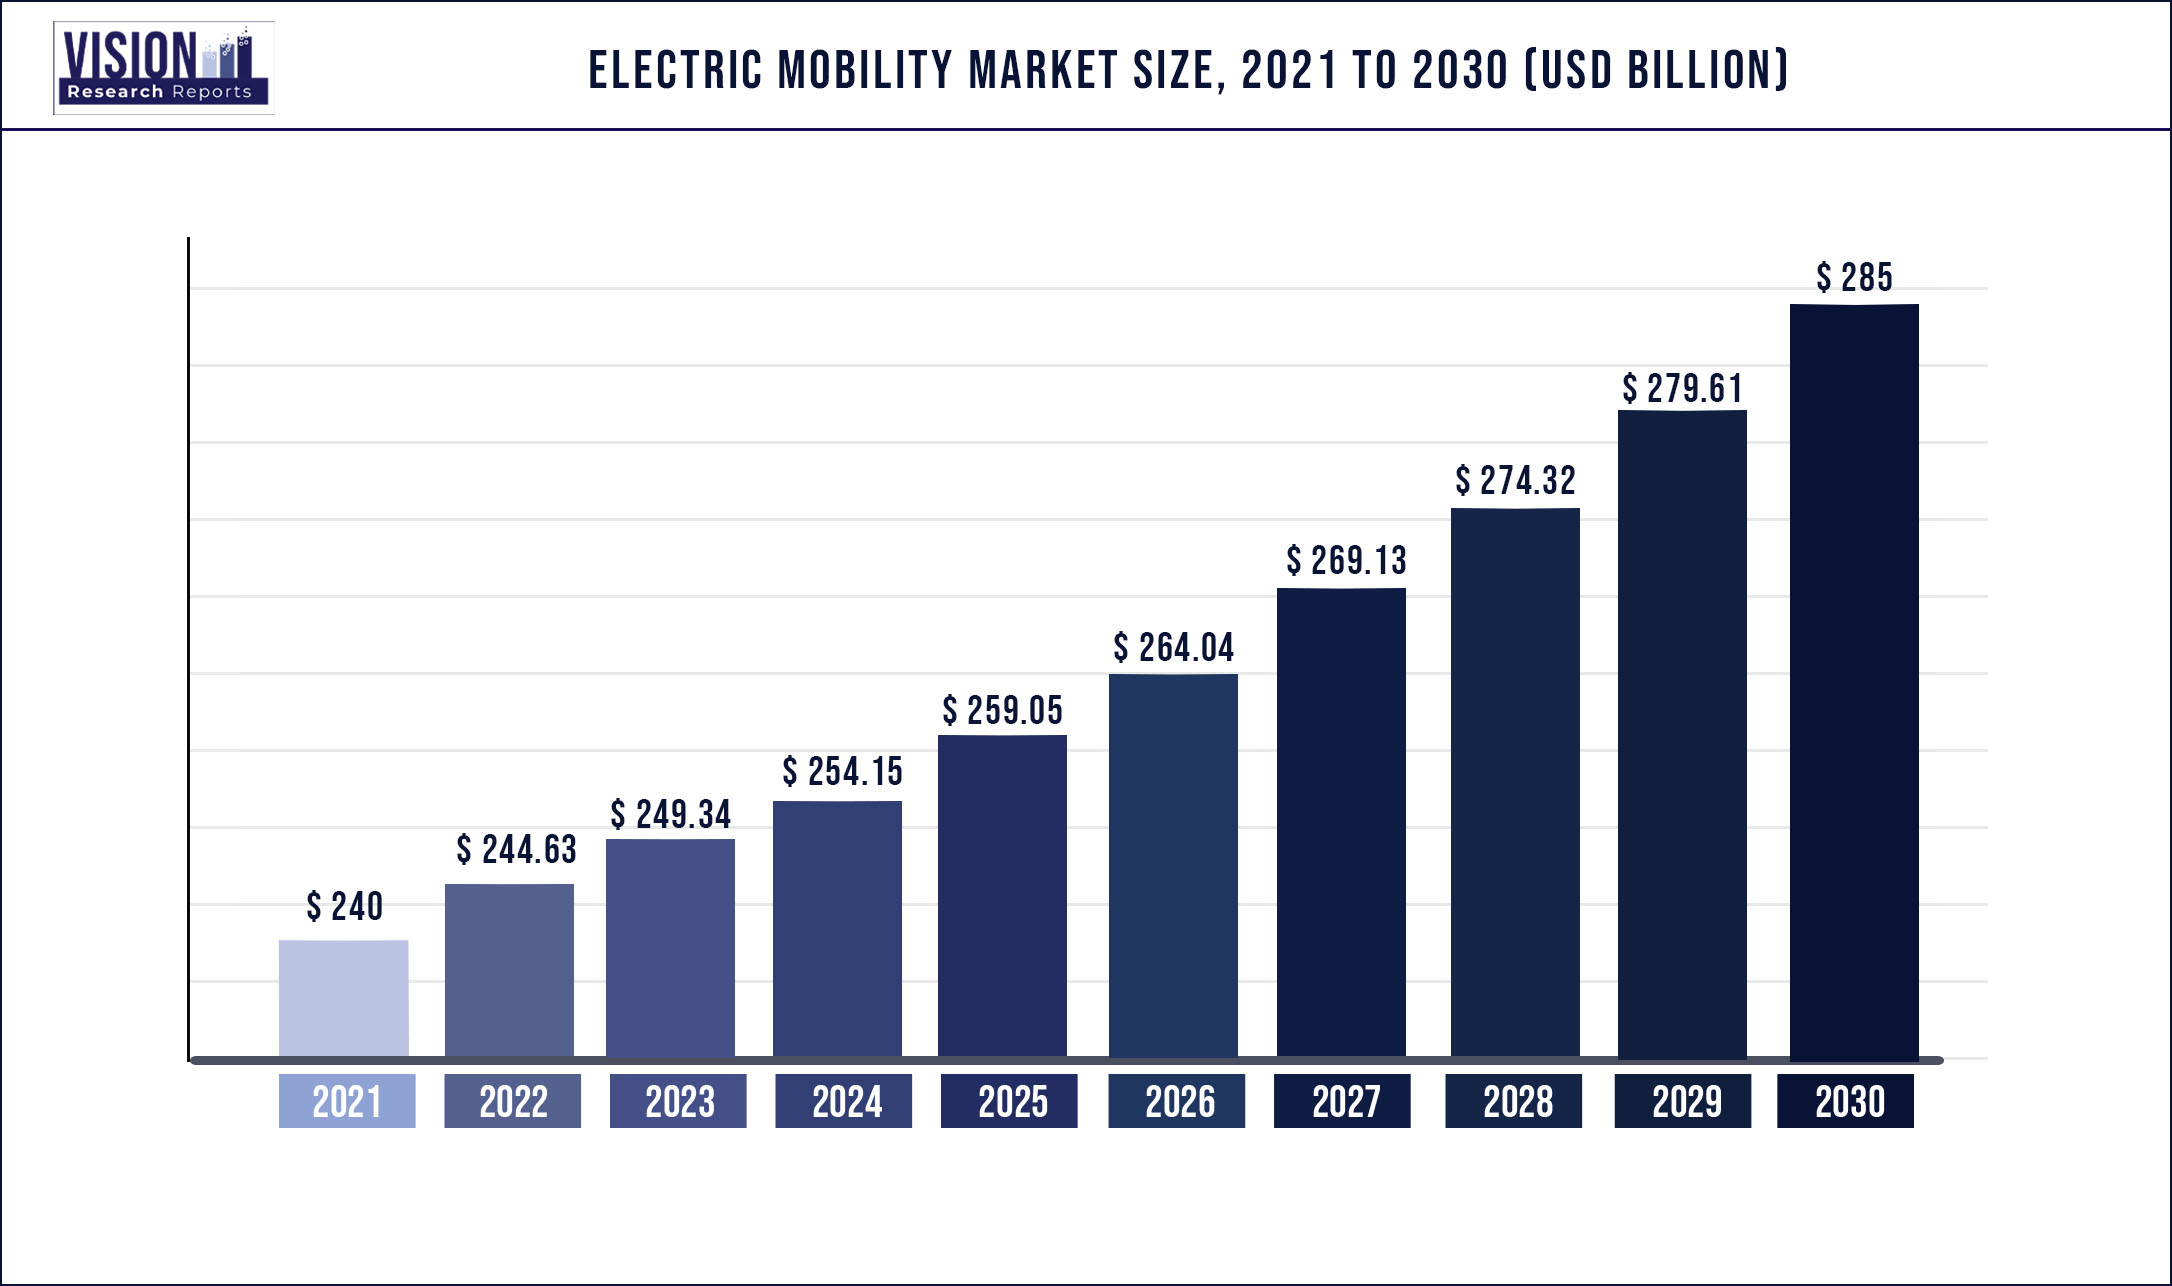 Electric Mobility Market Size 2021 to 2030